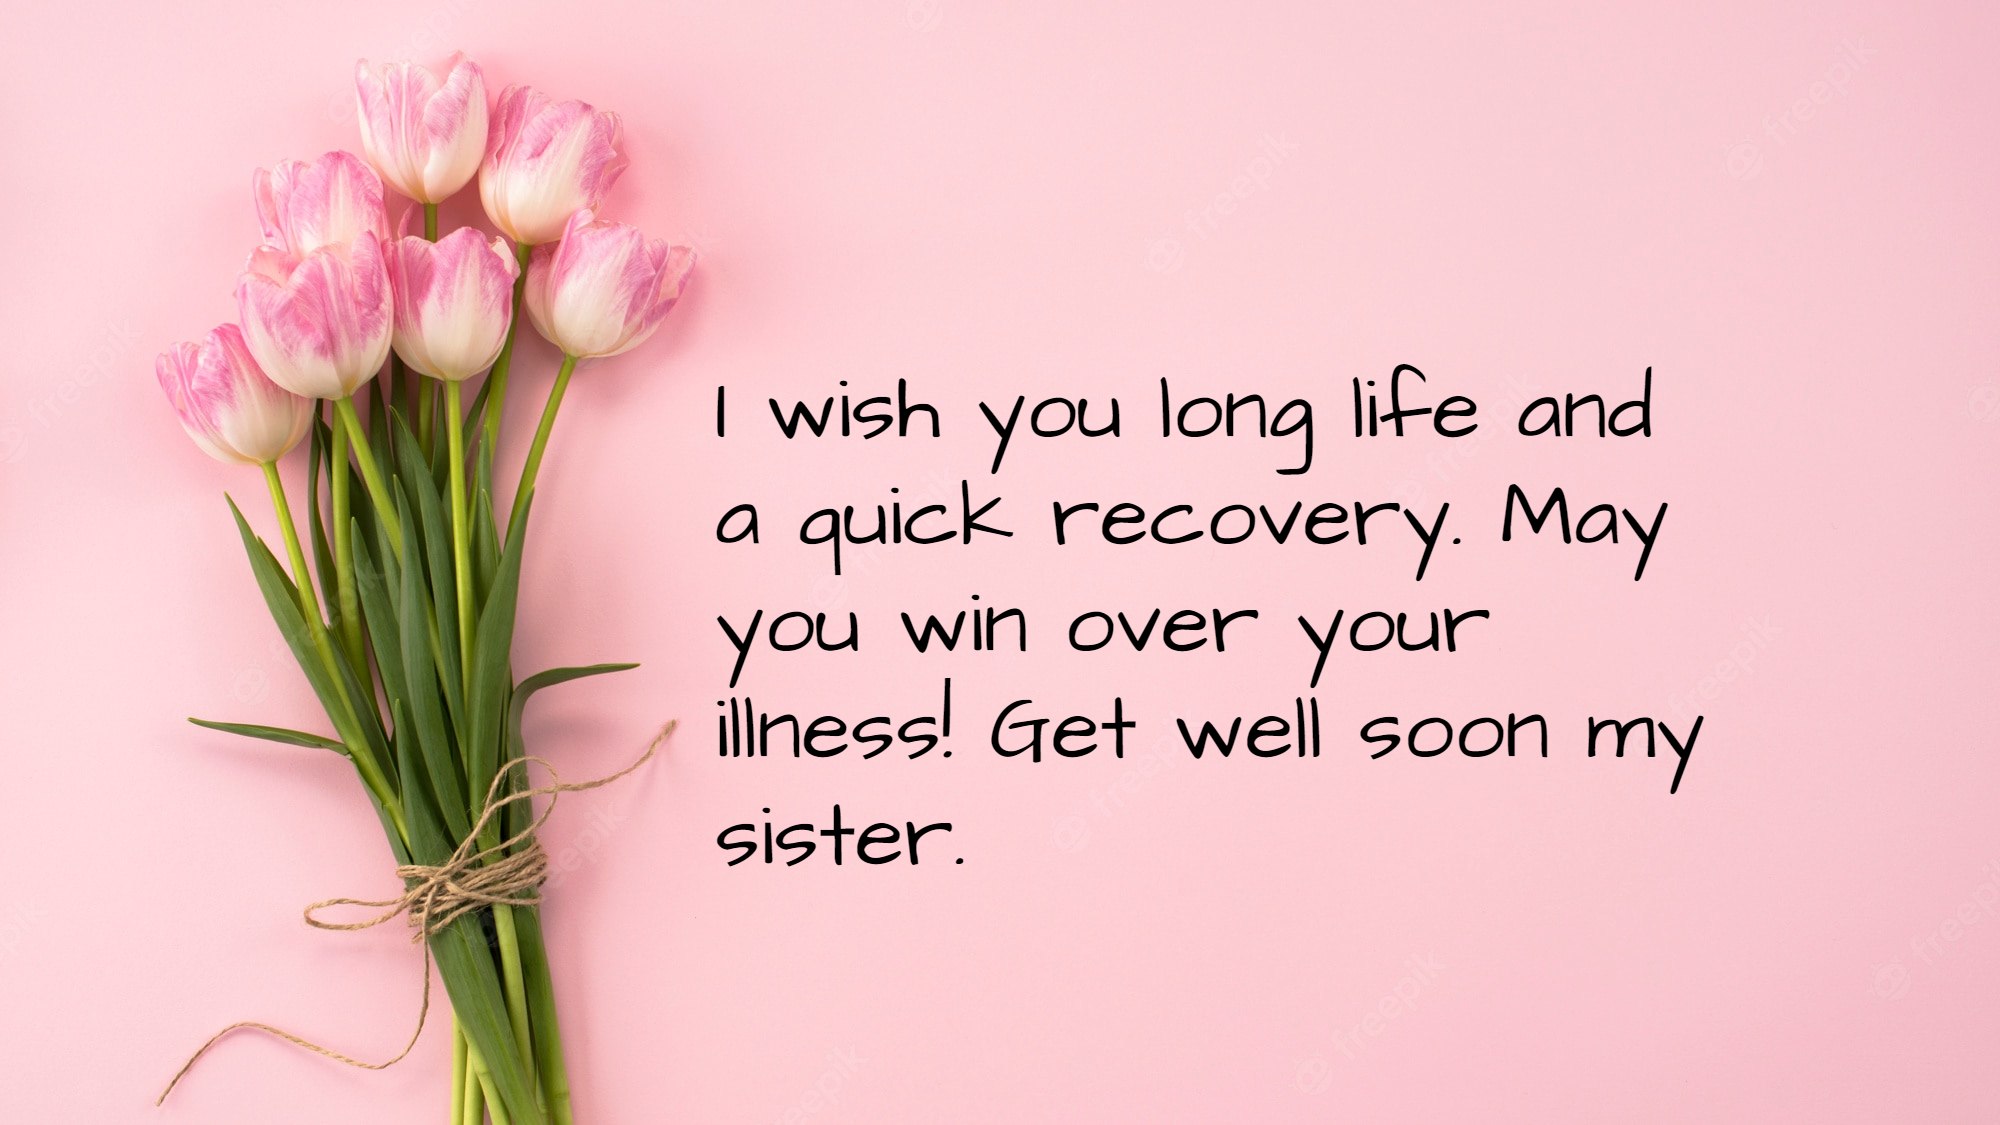 Get Well Soon Prayer Wishes For Sister